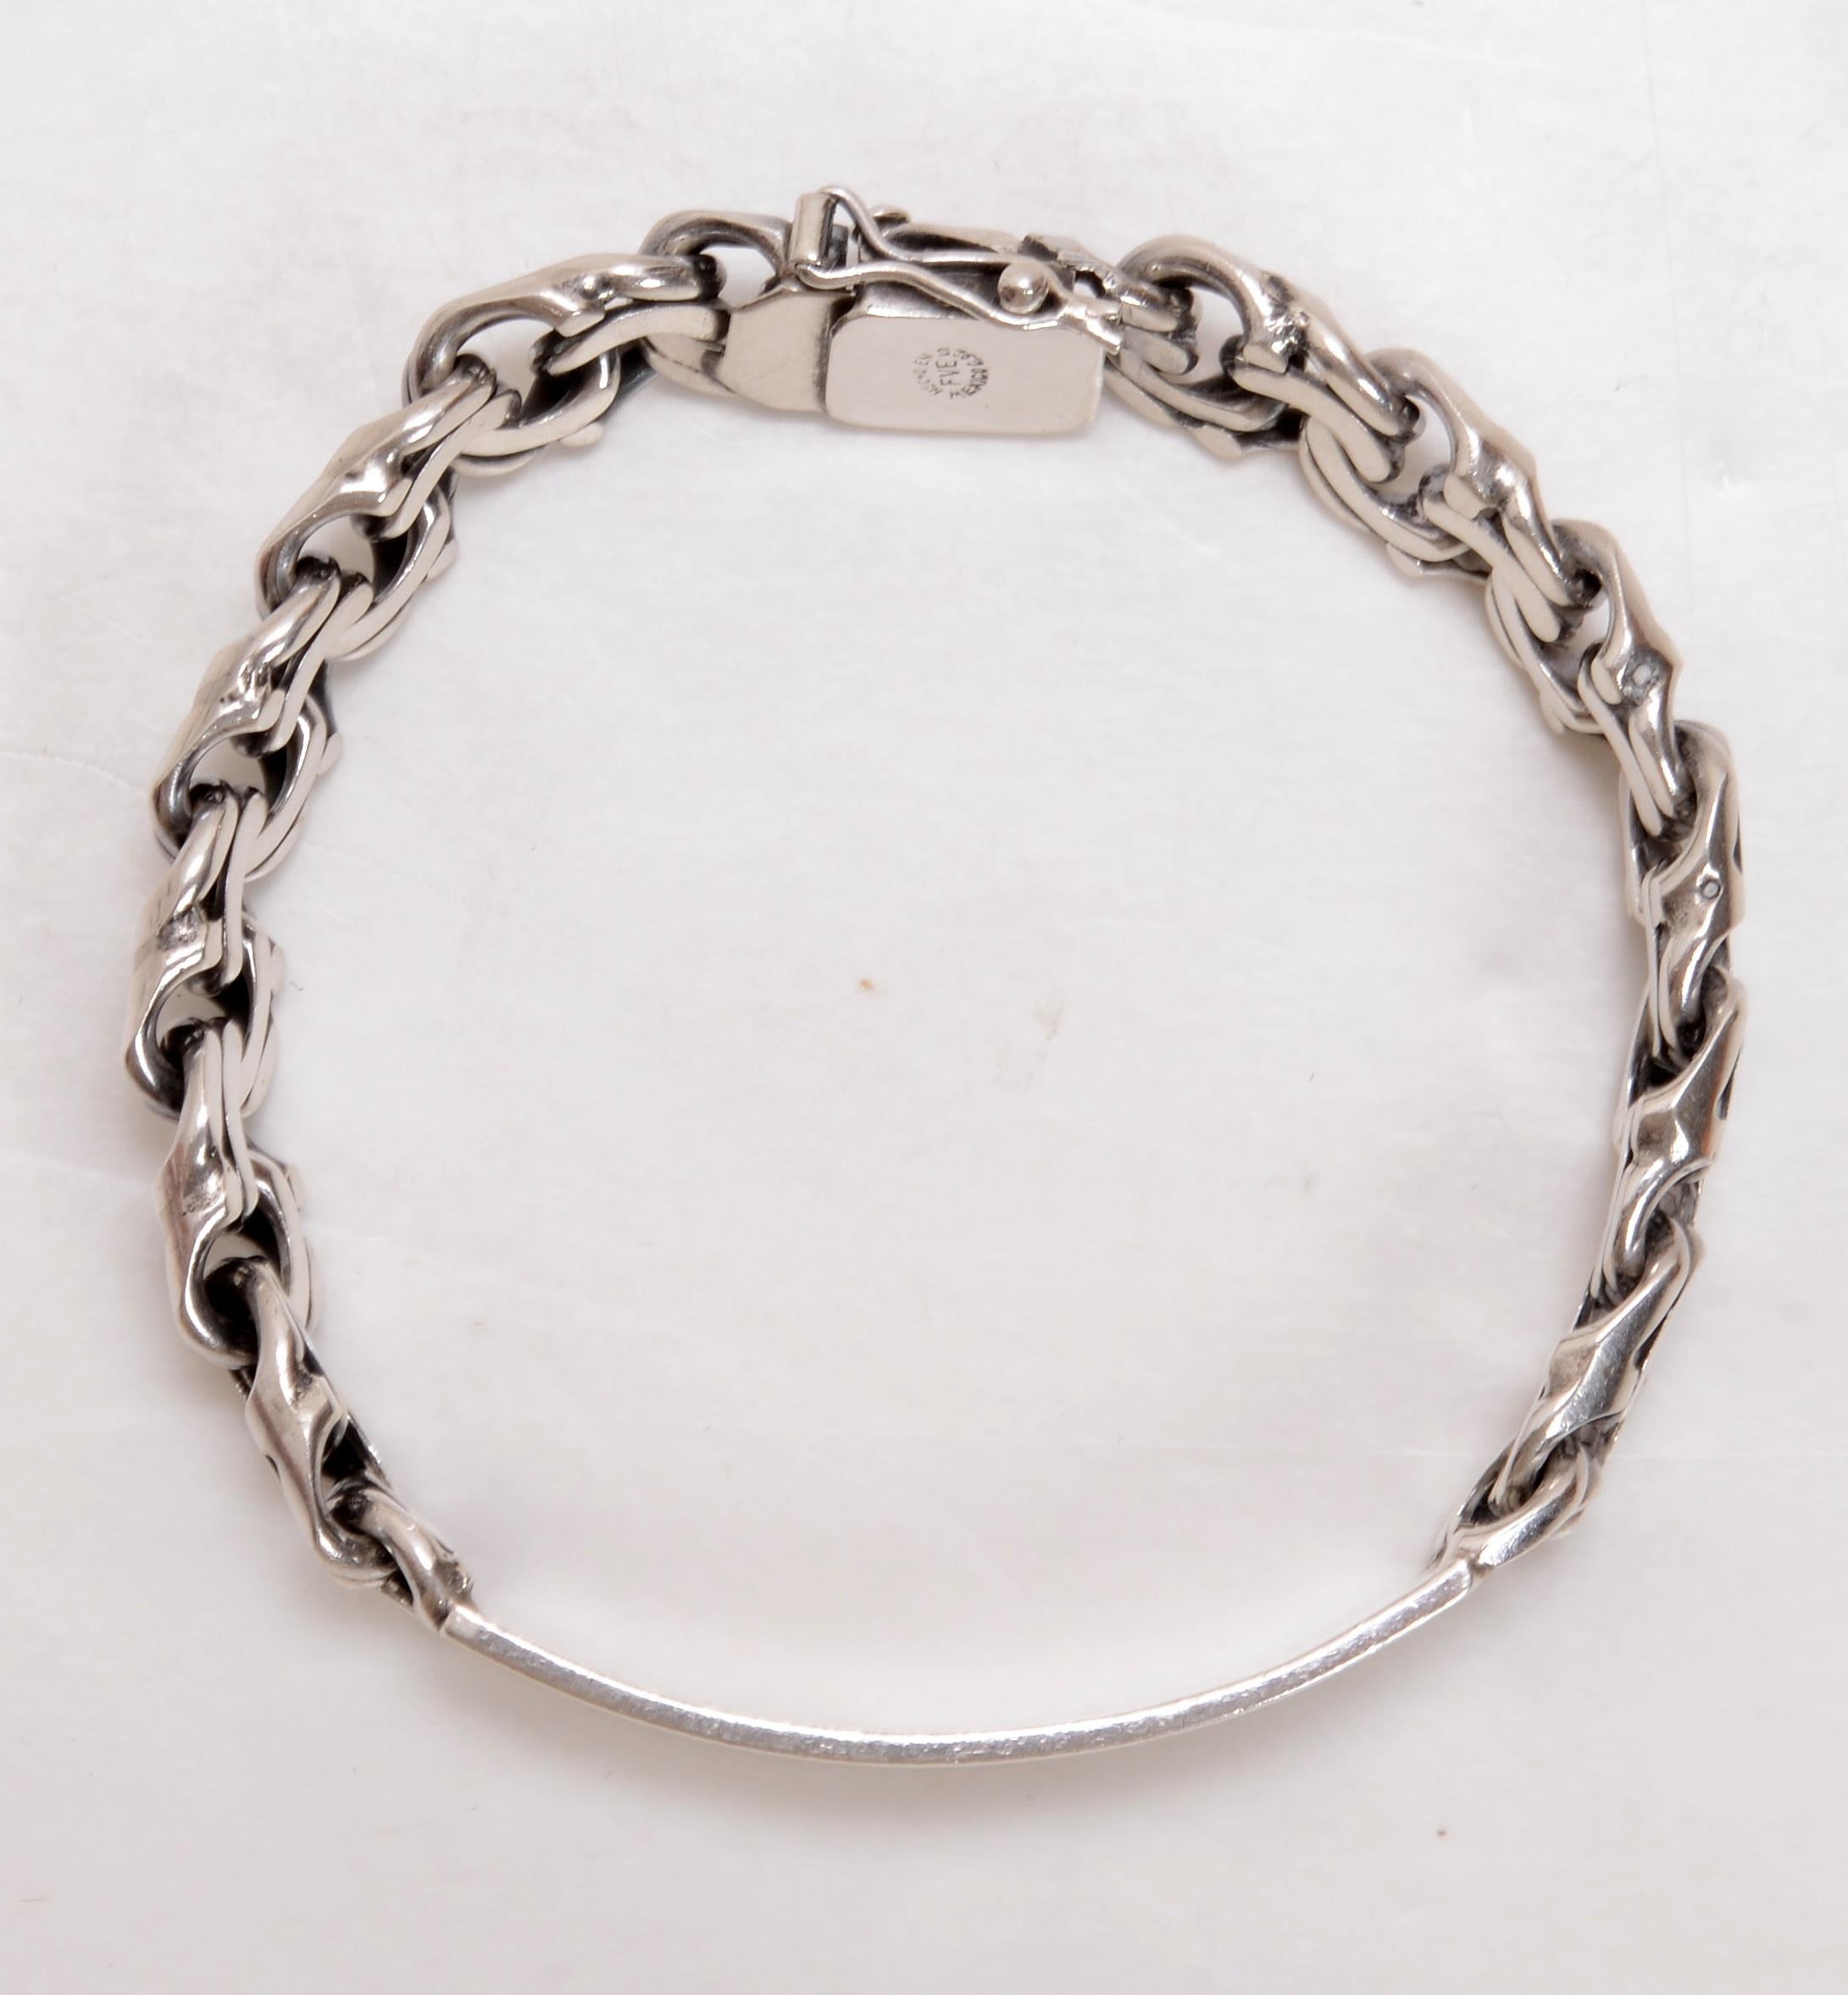 Vintage Sterling Silver Mexican ID Bracelet with Garibaldi Link, Marked “Hecho en México”® (Made in Mexico) Trademark and Makers Mark 'FVE'. This is an authorized and licensed mark used by some jewelry makers recognized by the government and held to